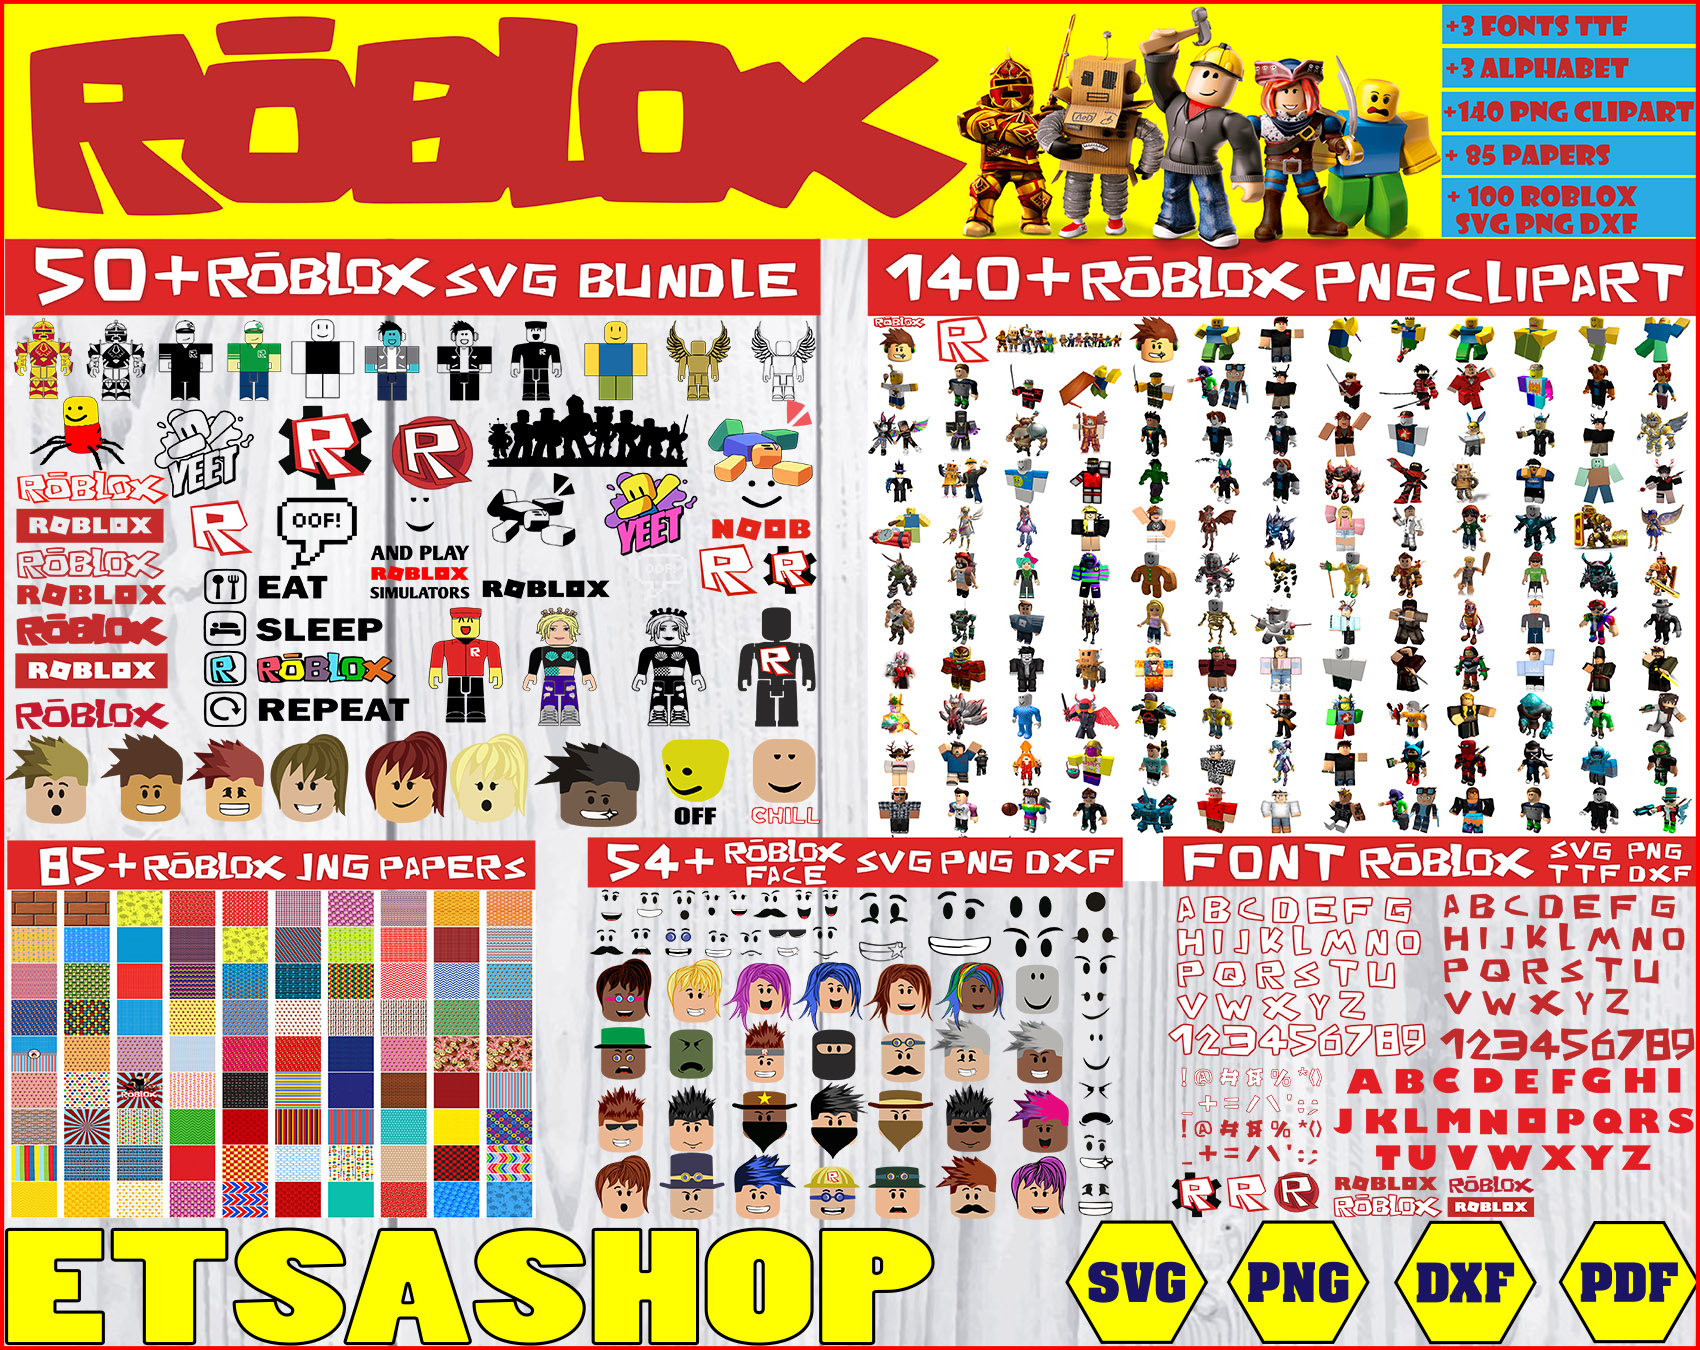 Download Roblox Svg Bundle Robloxsvg Png Dxf Roblox Clipart Bundle Digital Download Outstanding And Different